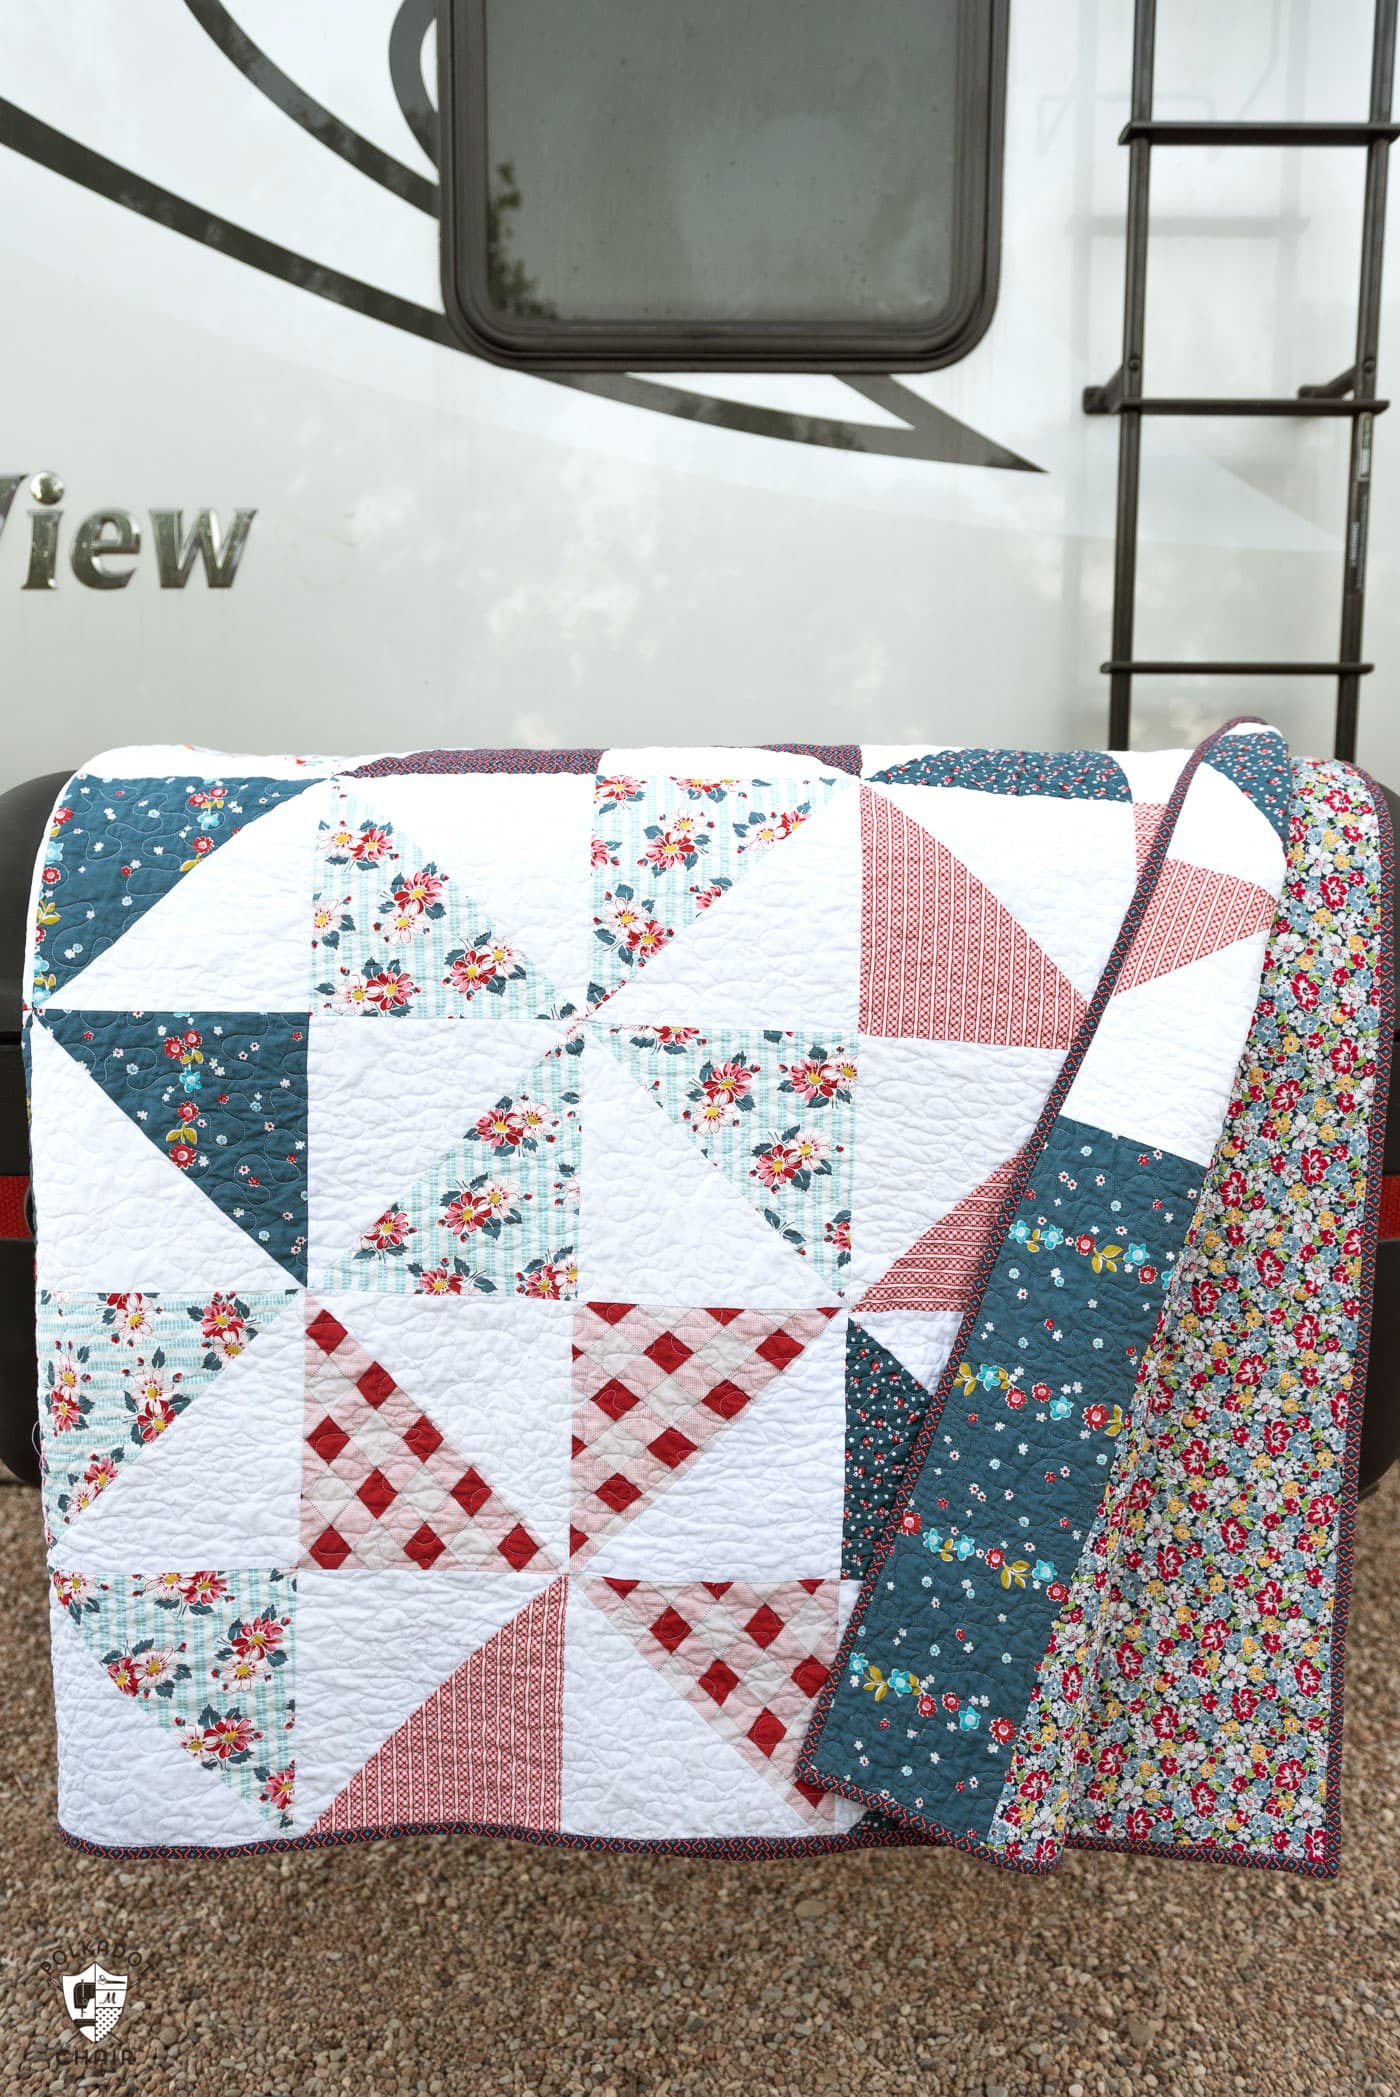 4th-of-july-quilt-ideas-the-polka-dot-chair